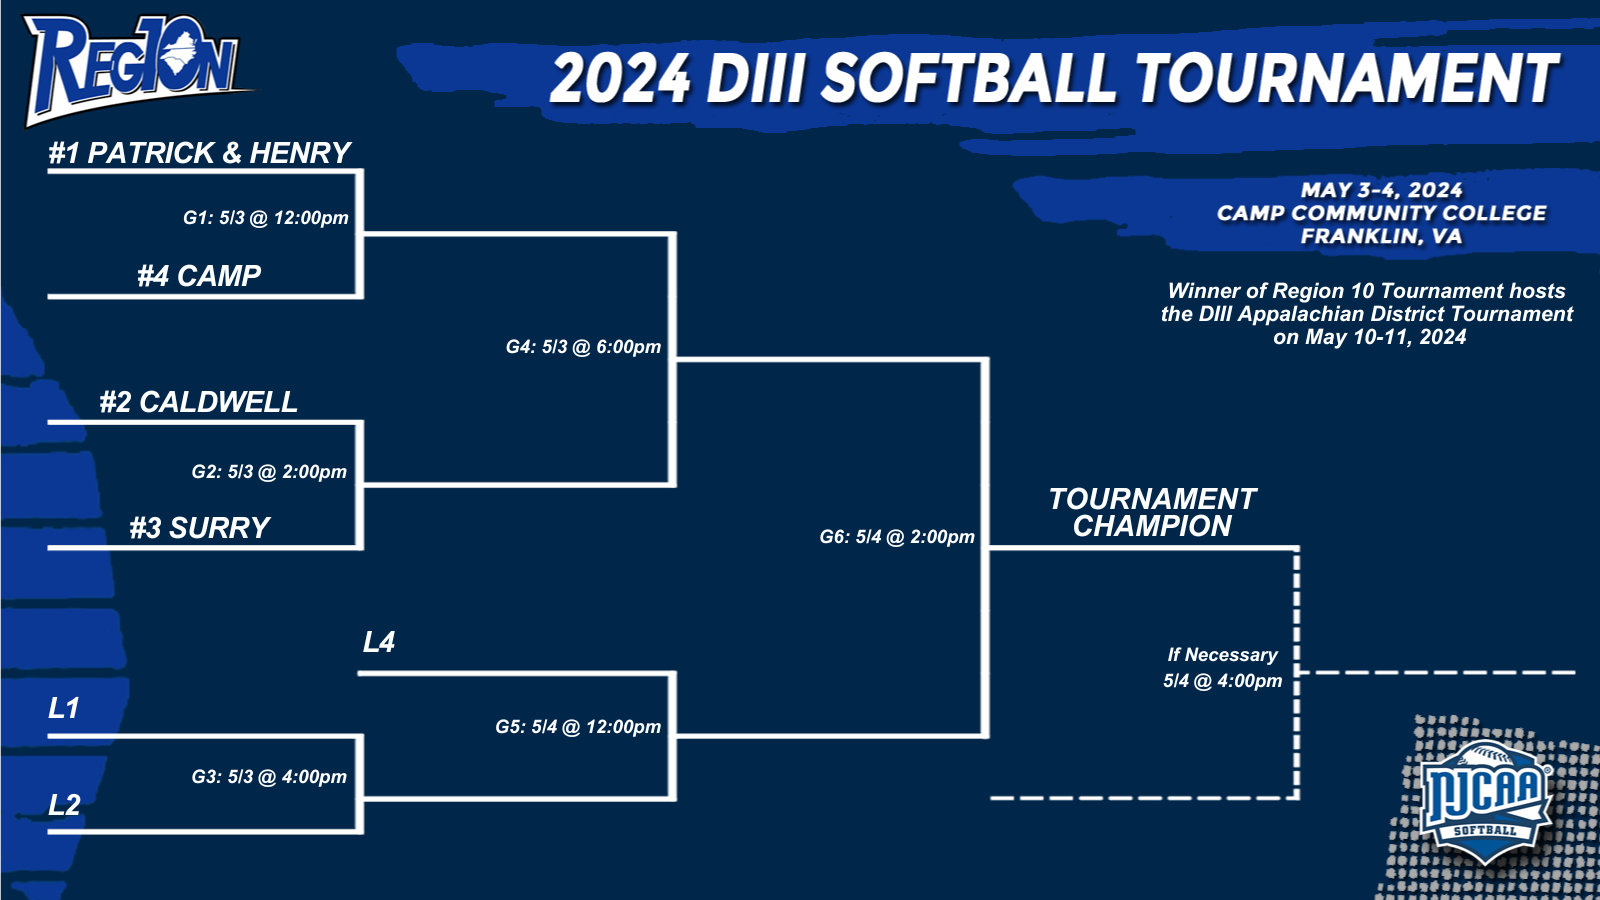 DIII Softball Tournament Seeding and Scheduled Announced